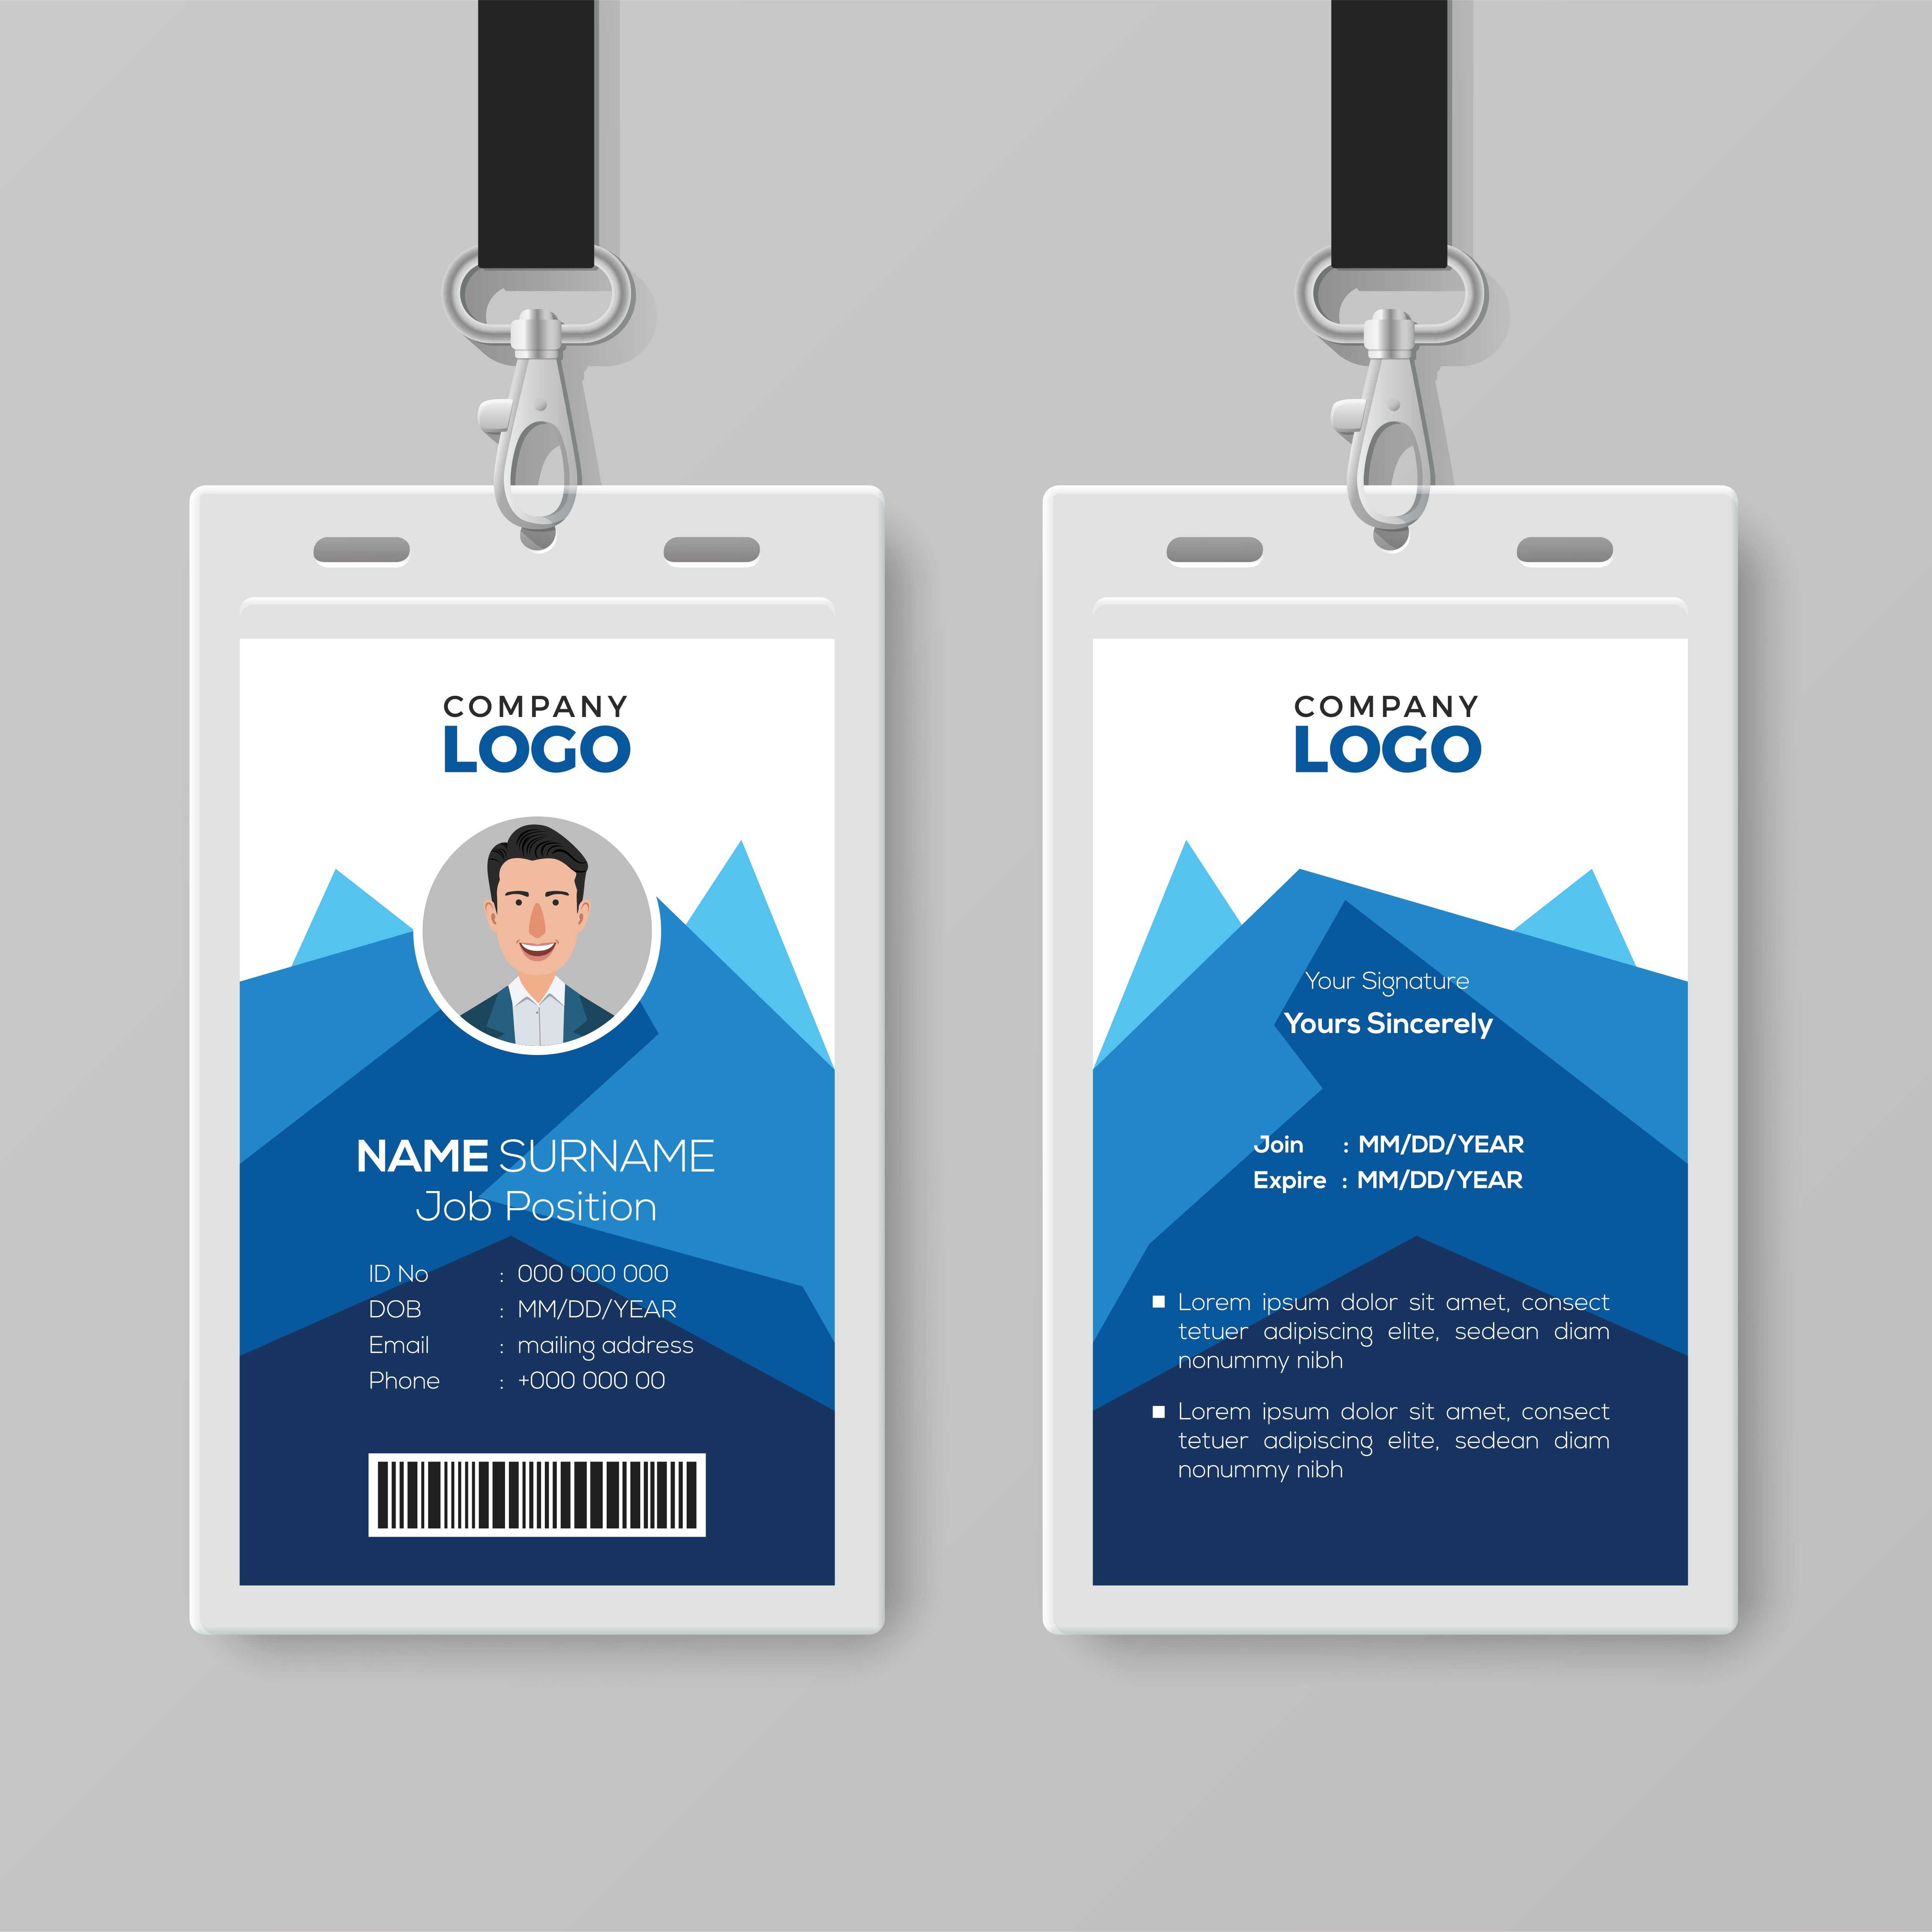 This Id Card Template Perfect For Any Types Of Agency Intended For Company Id Card Design Template